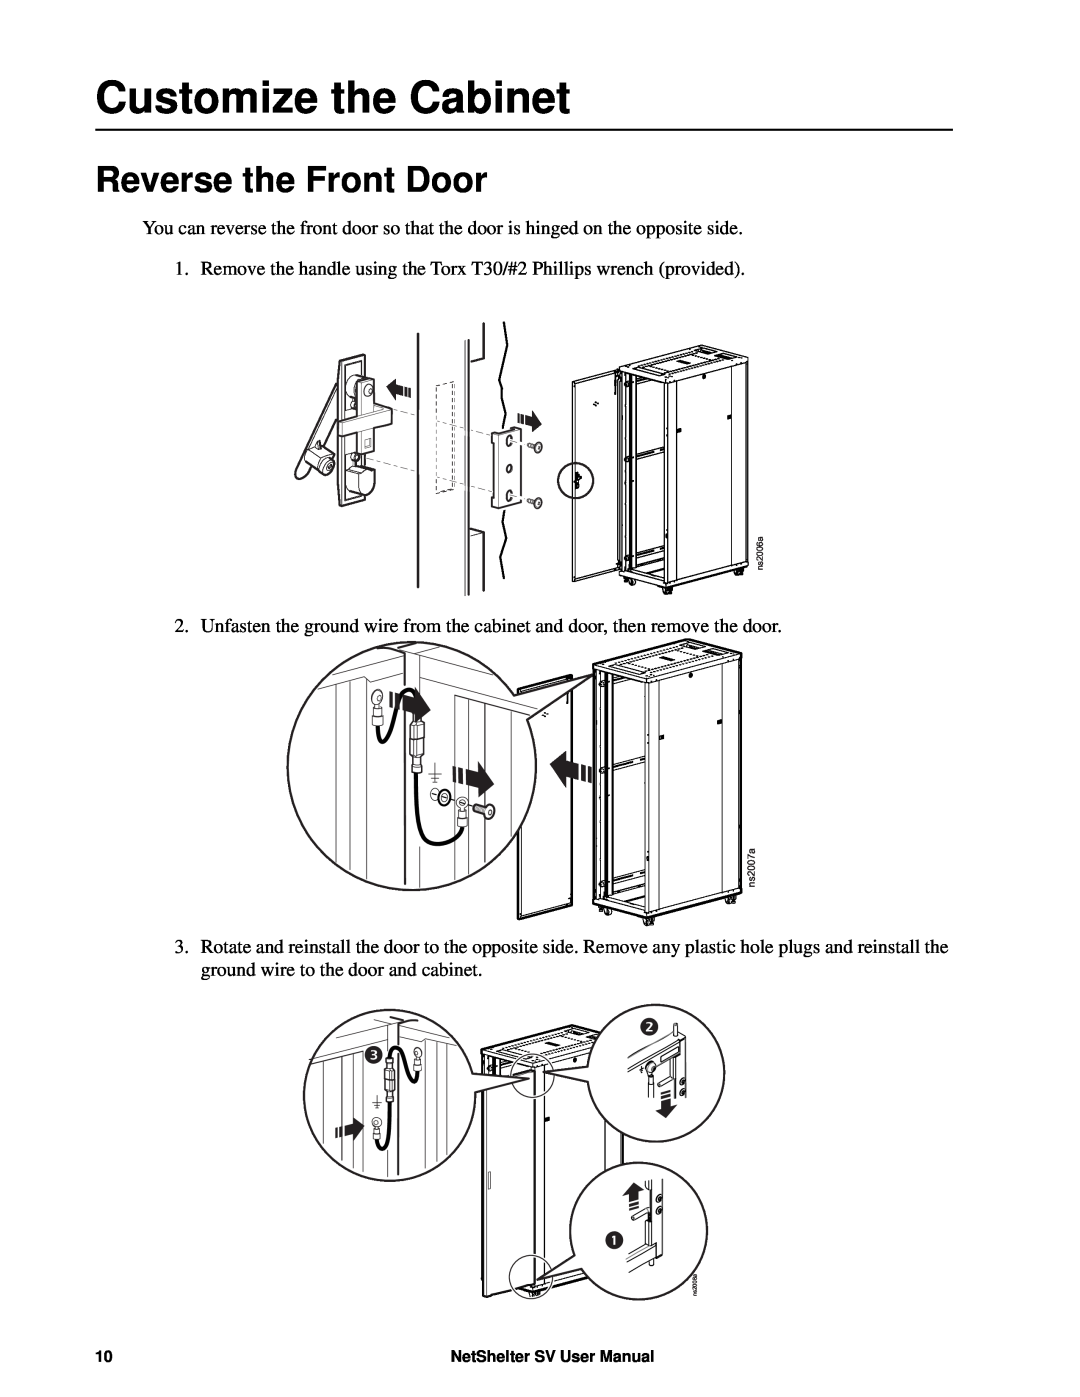 APC AR2400 user manual Customize the Cabinet, Reverse the Front Door 